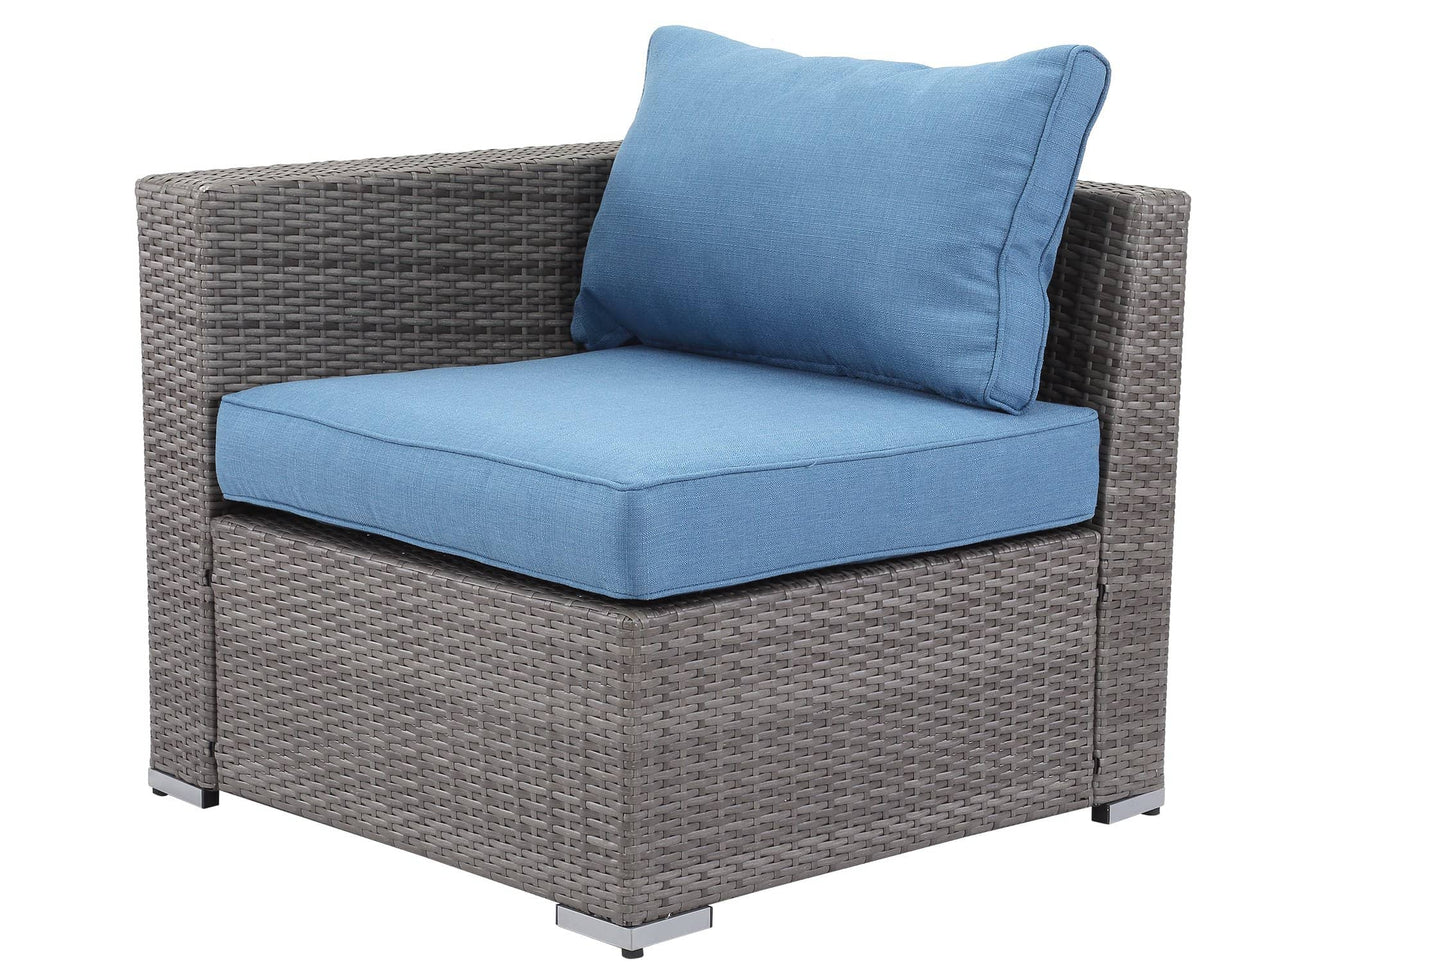 Context Evoke 6 Piece All Weather Wicker Sofa Seating Group with Cushions and Coffee Table